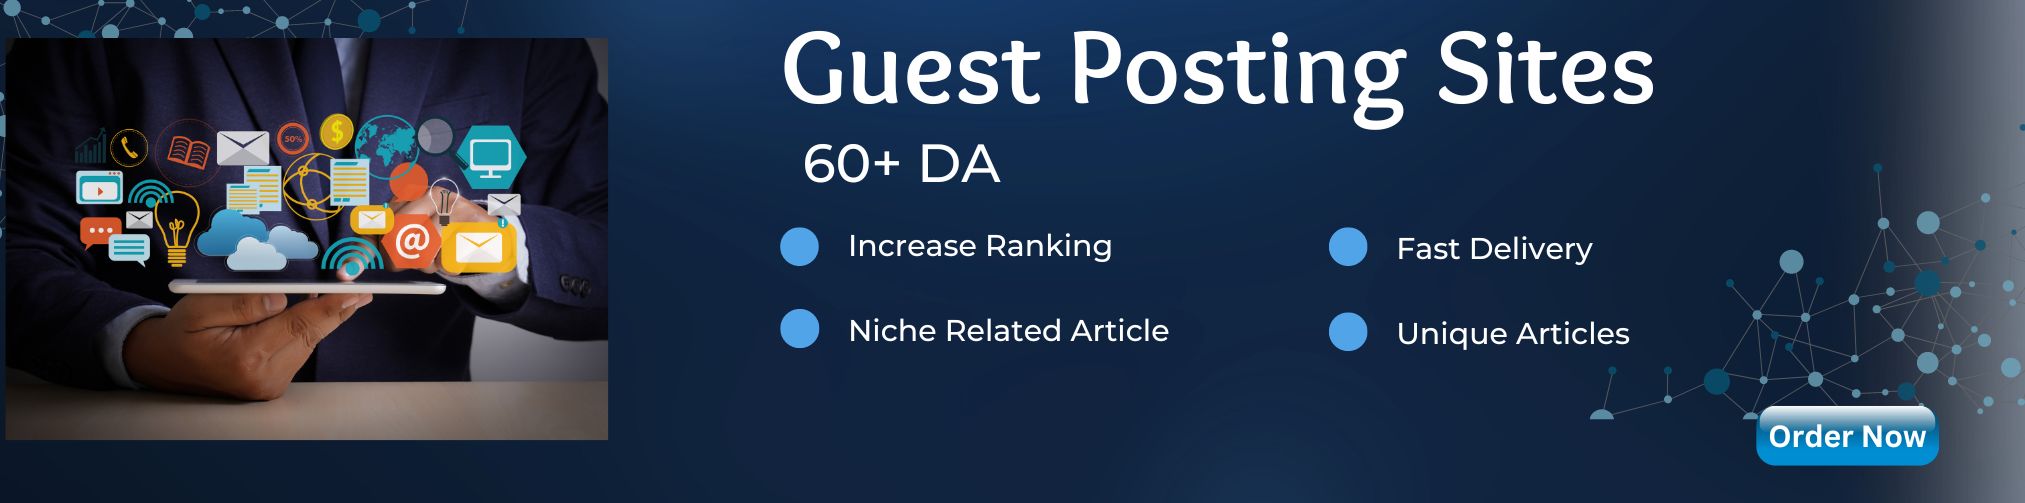 USA guest posting services